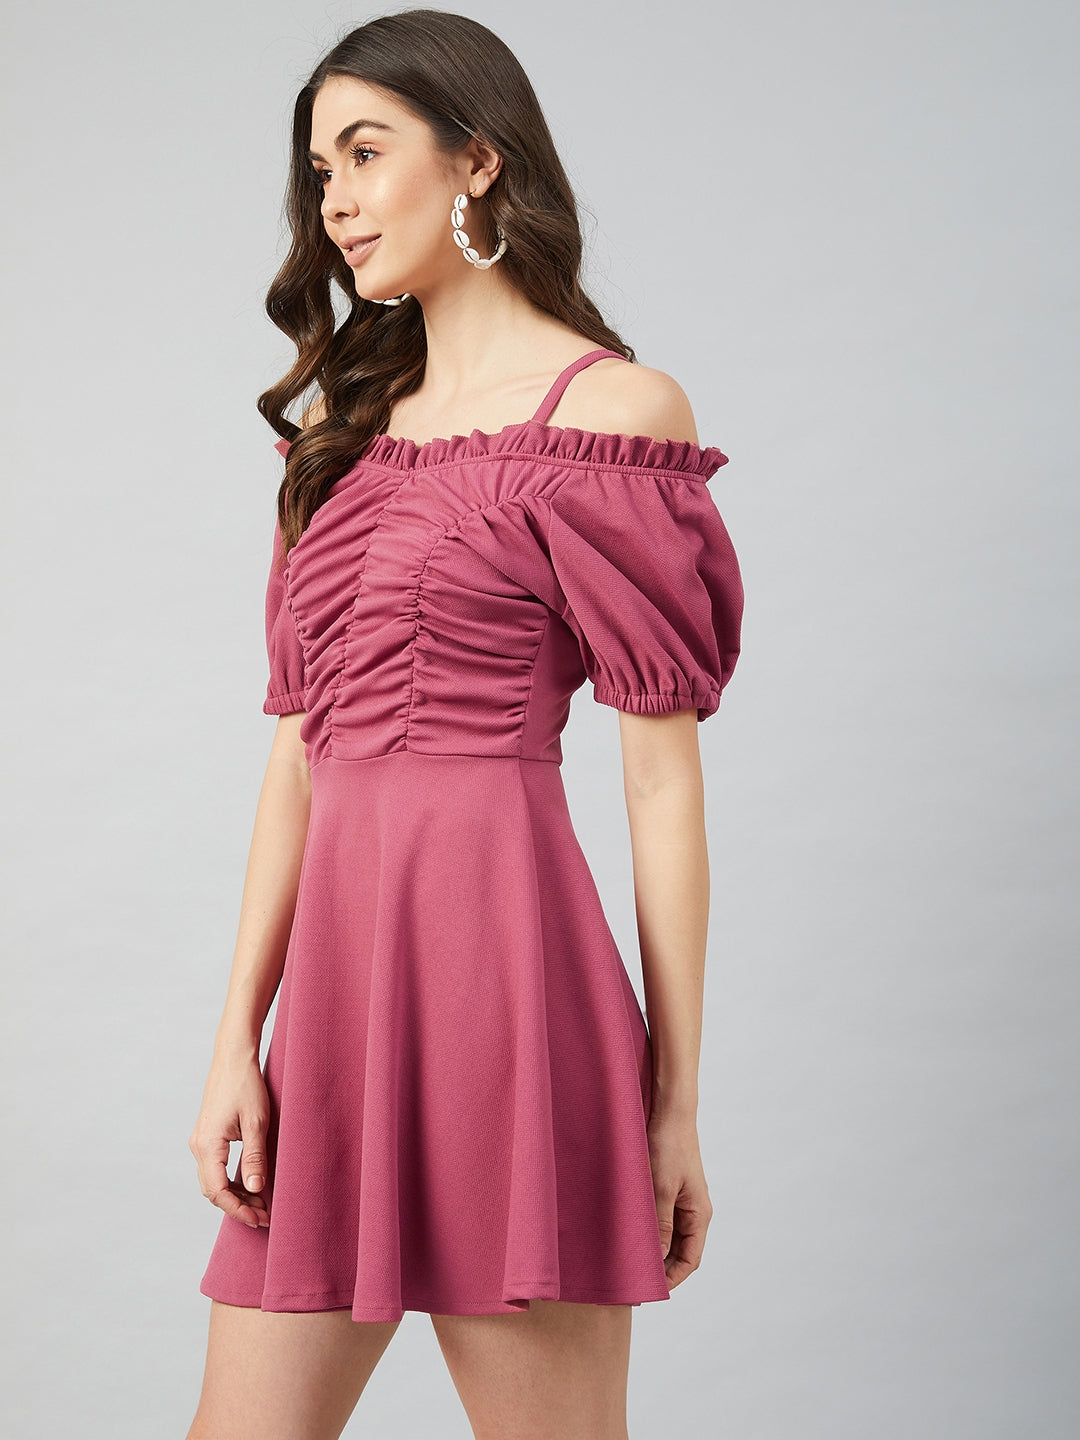 Athena Women Pink Ruched Fit and Flare Dress - Athena Lifestyle